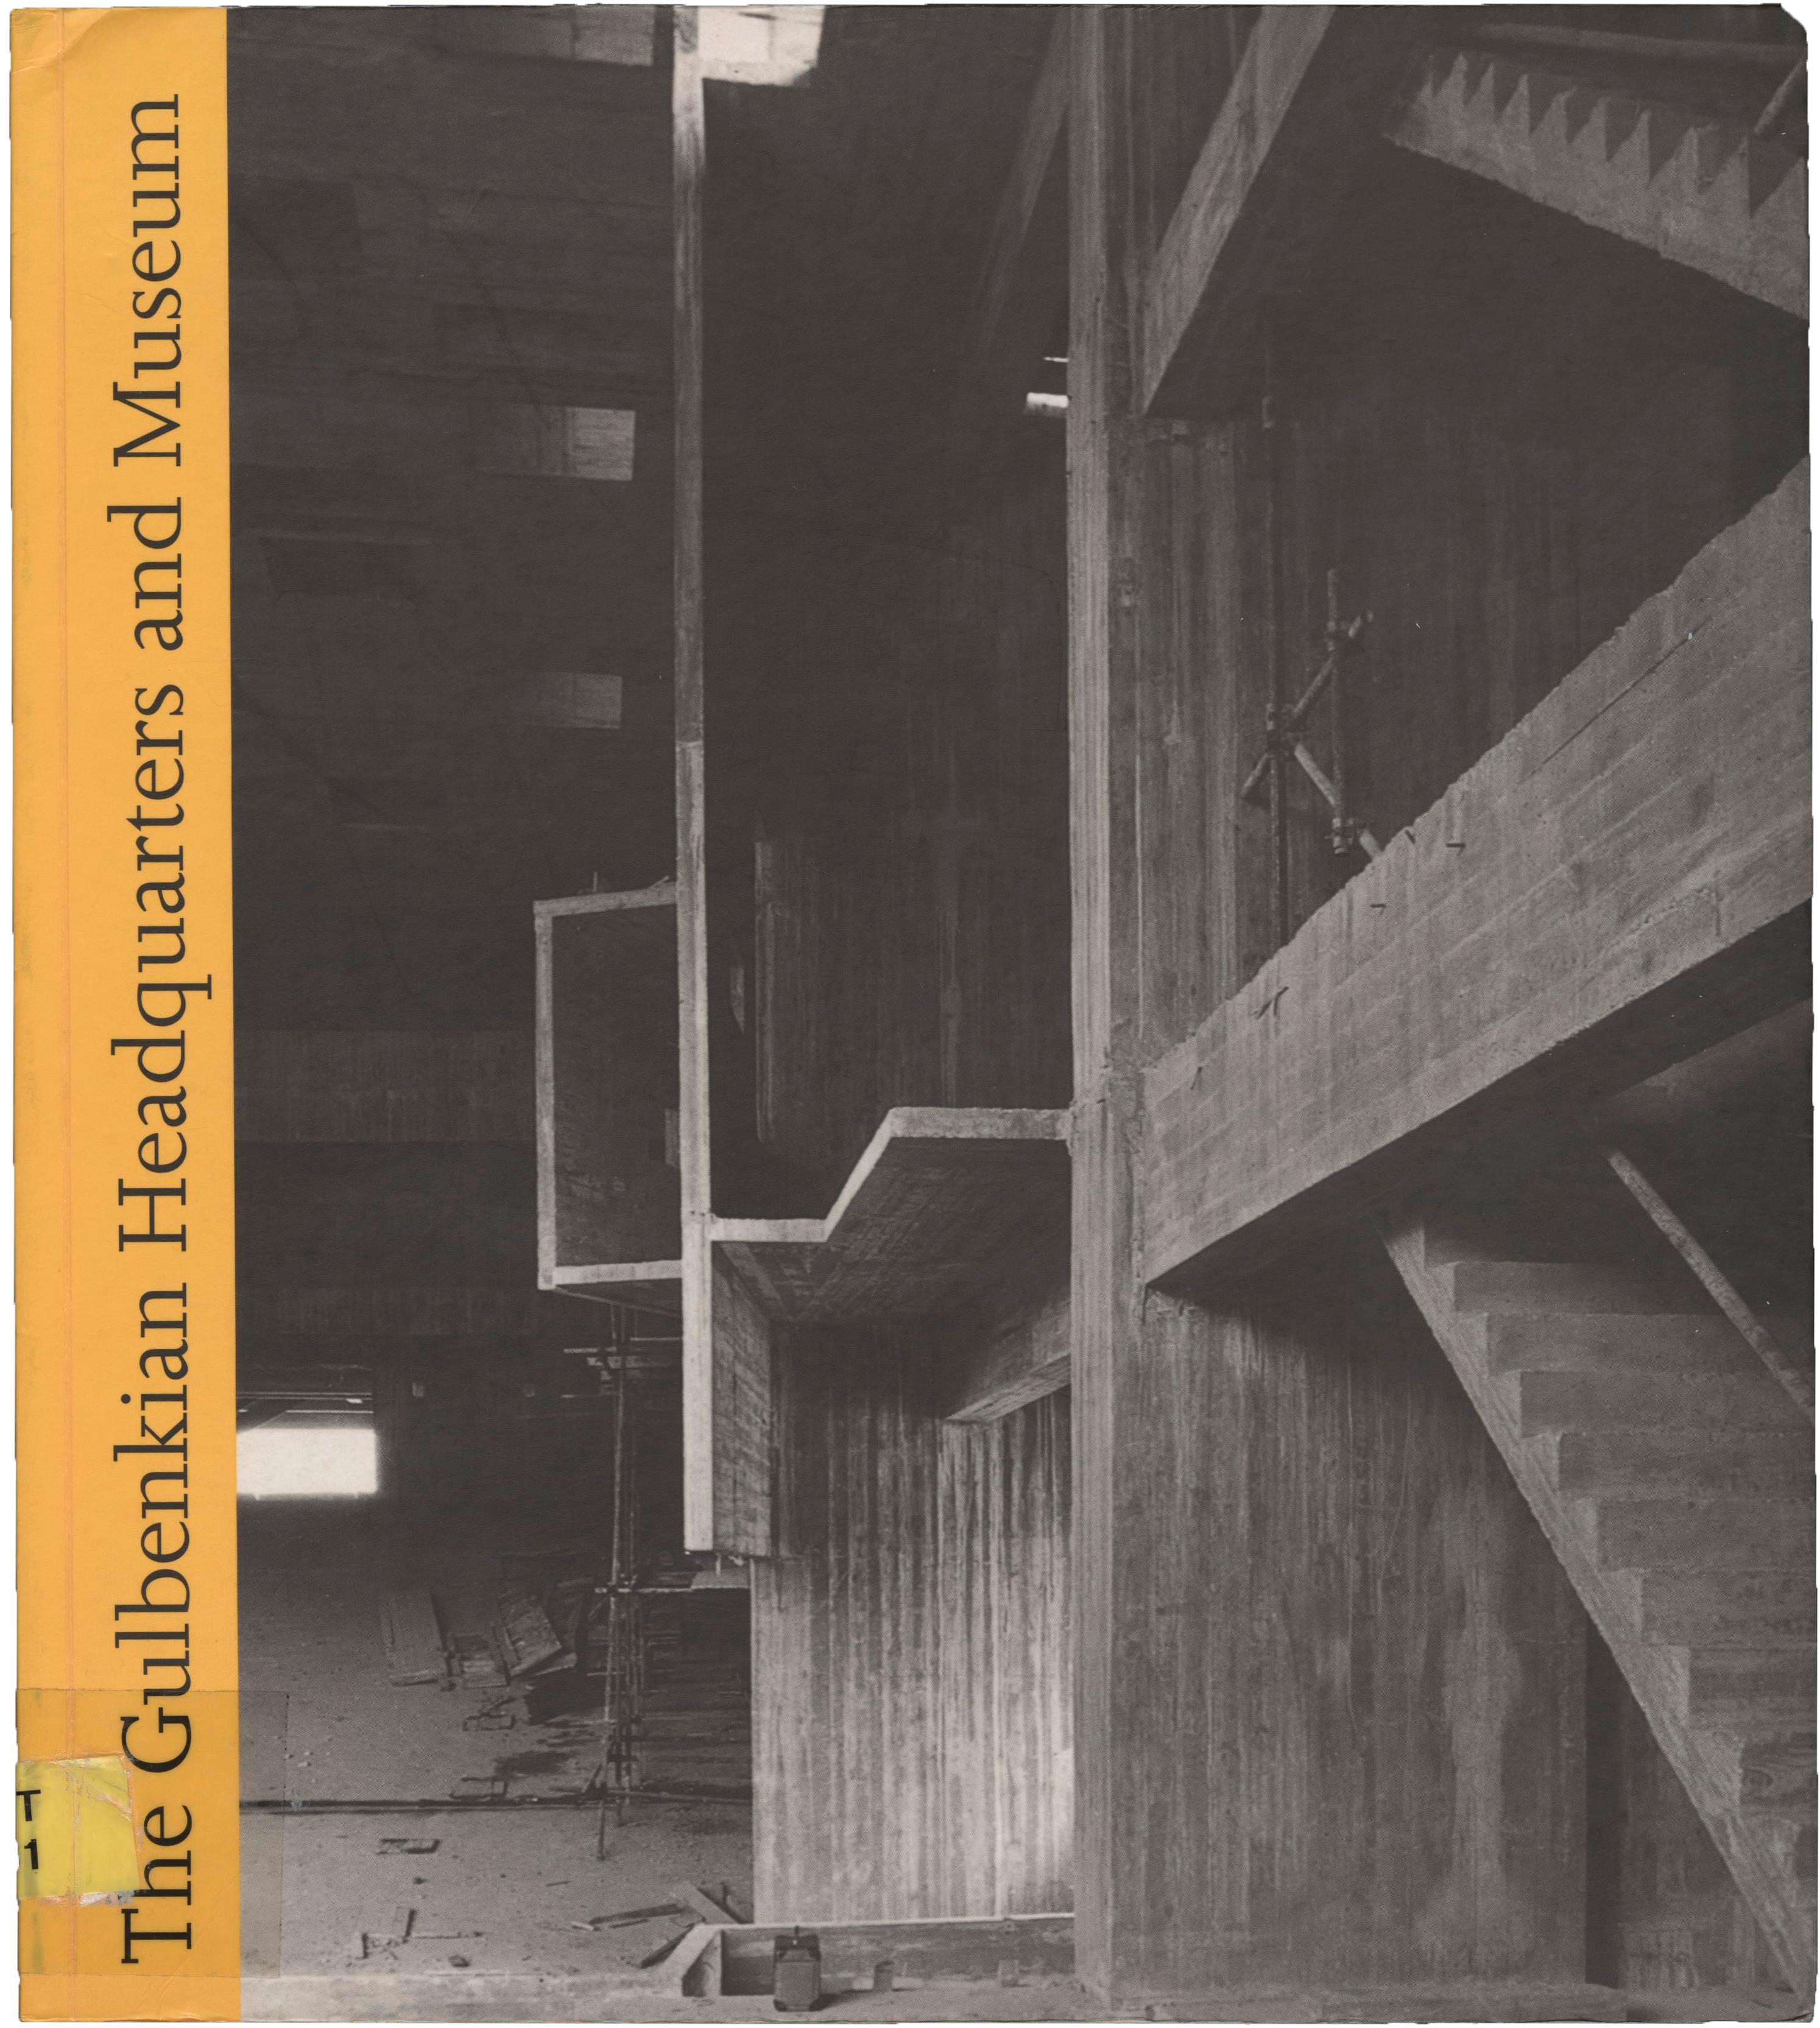 The Gulbenkian Headquarters and Museum. Architecture Of The 60's. Essays